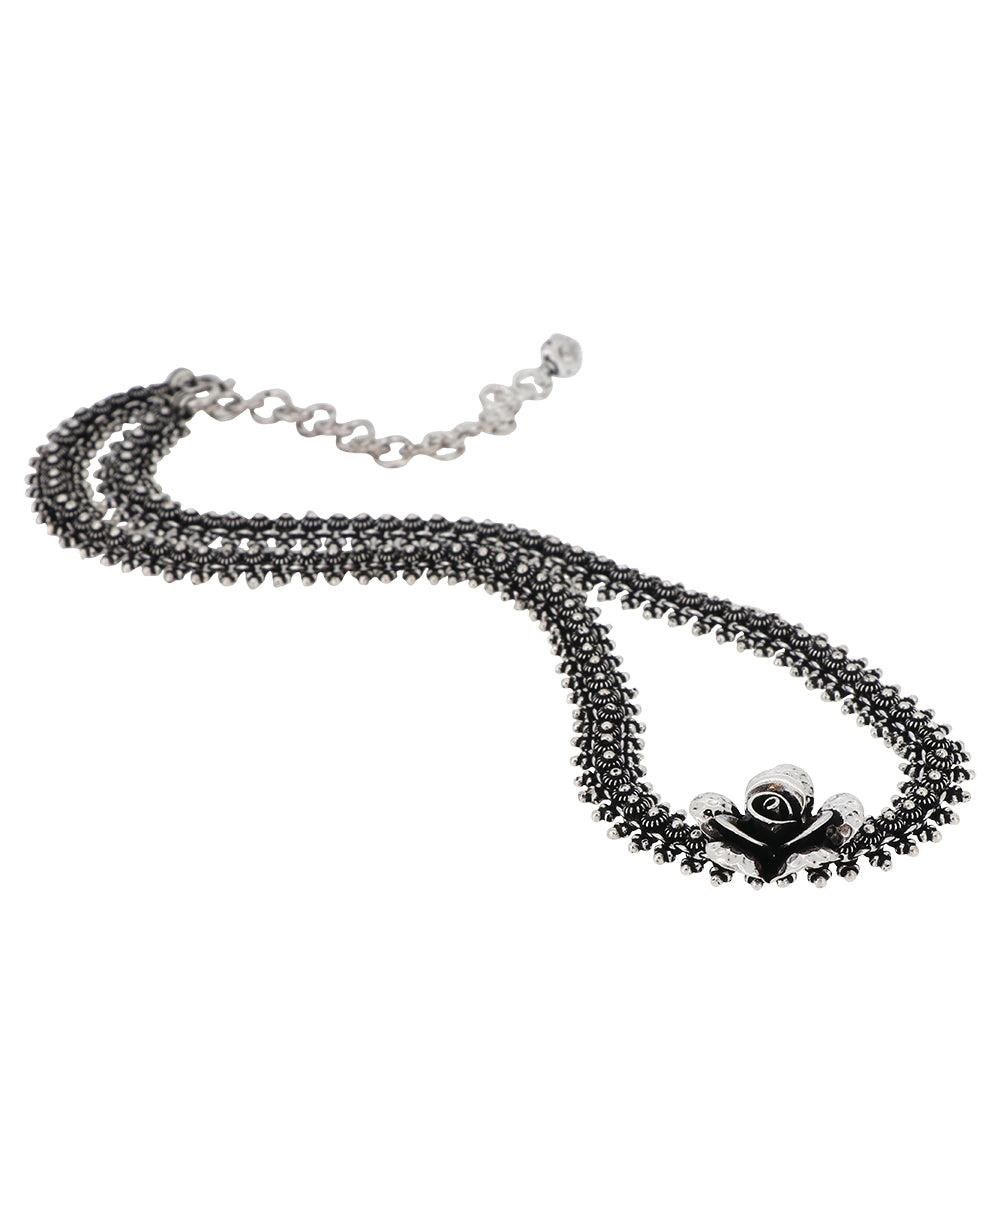 Elegant silver collar necklace featuring a stunning rose flower design, made in Laos